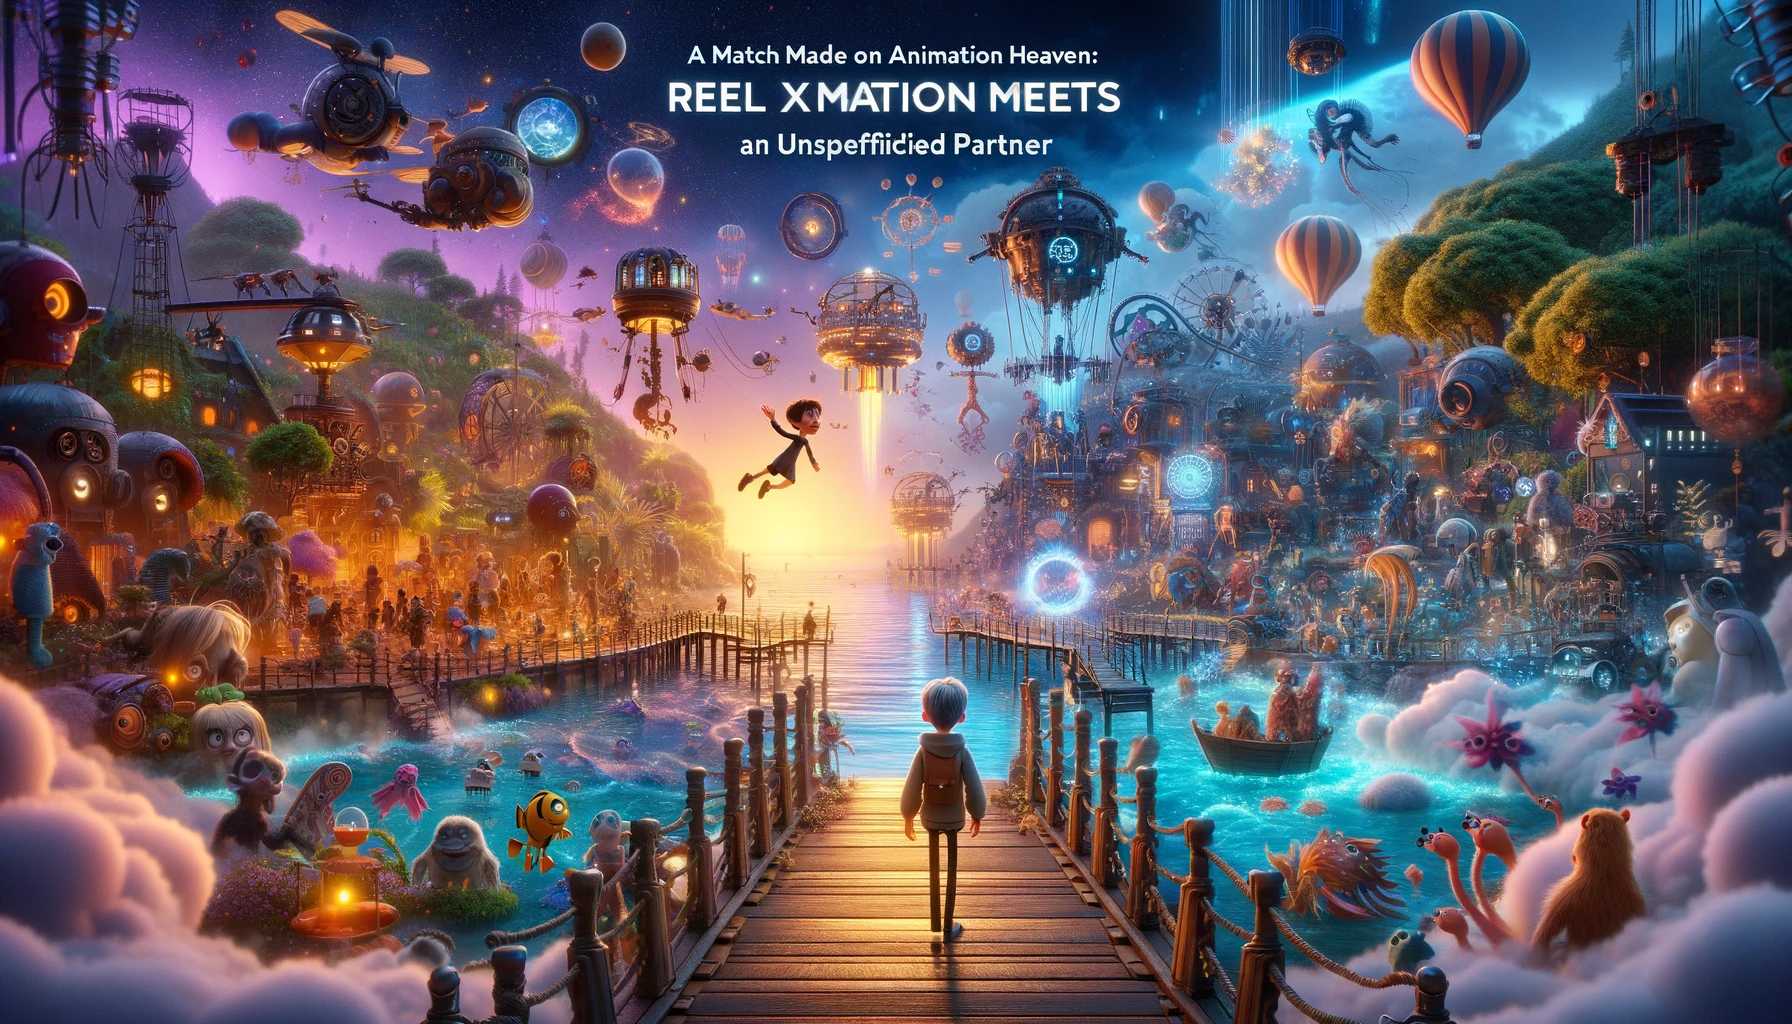 A Match Made in Animation Heaven: Reel FX Meets